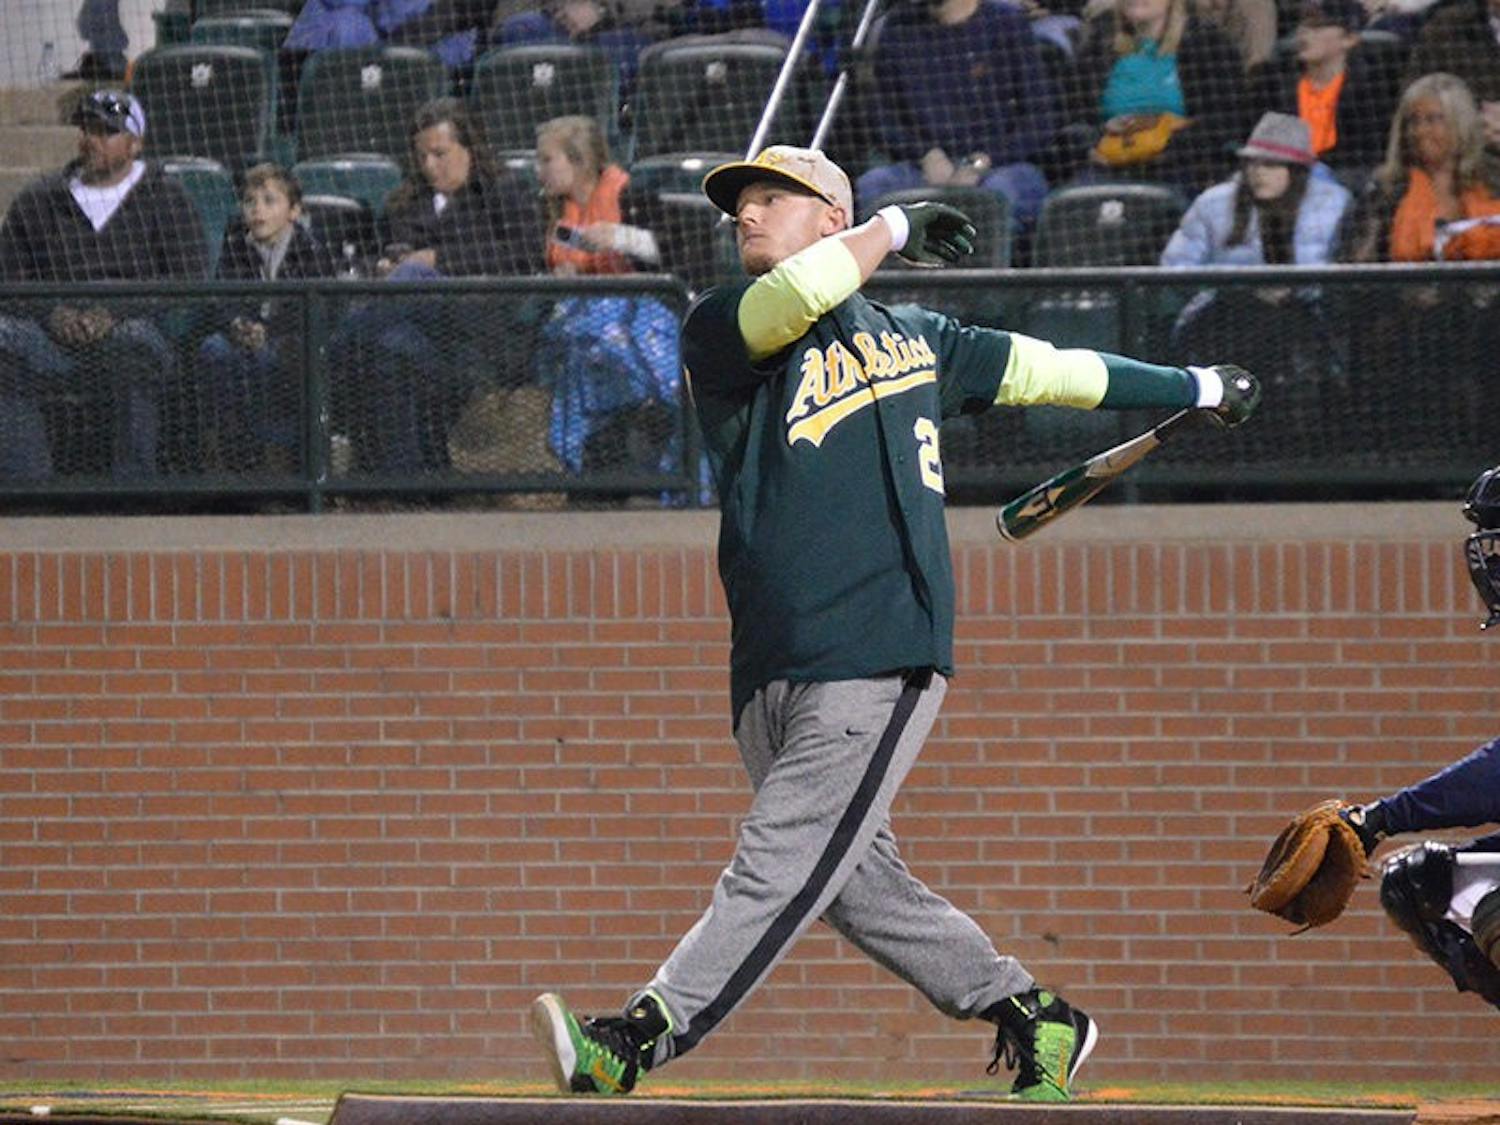 Donaldson up to bat. Home Run Derby at Auburn, AL on 11.21.14 (Emily Enfinger | Assistant Photo Editor)